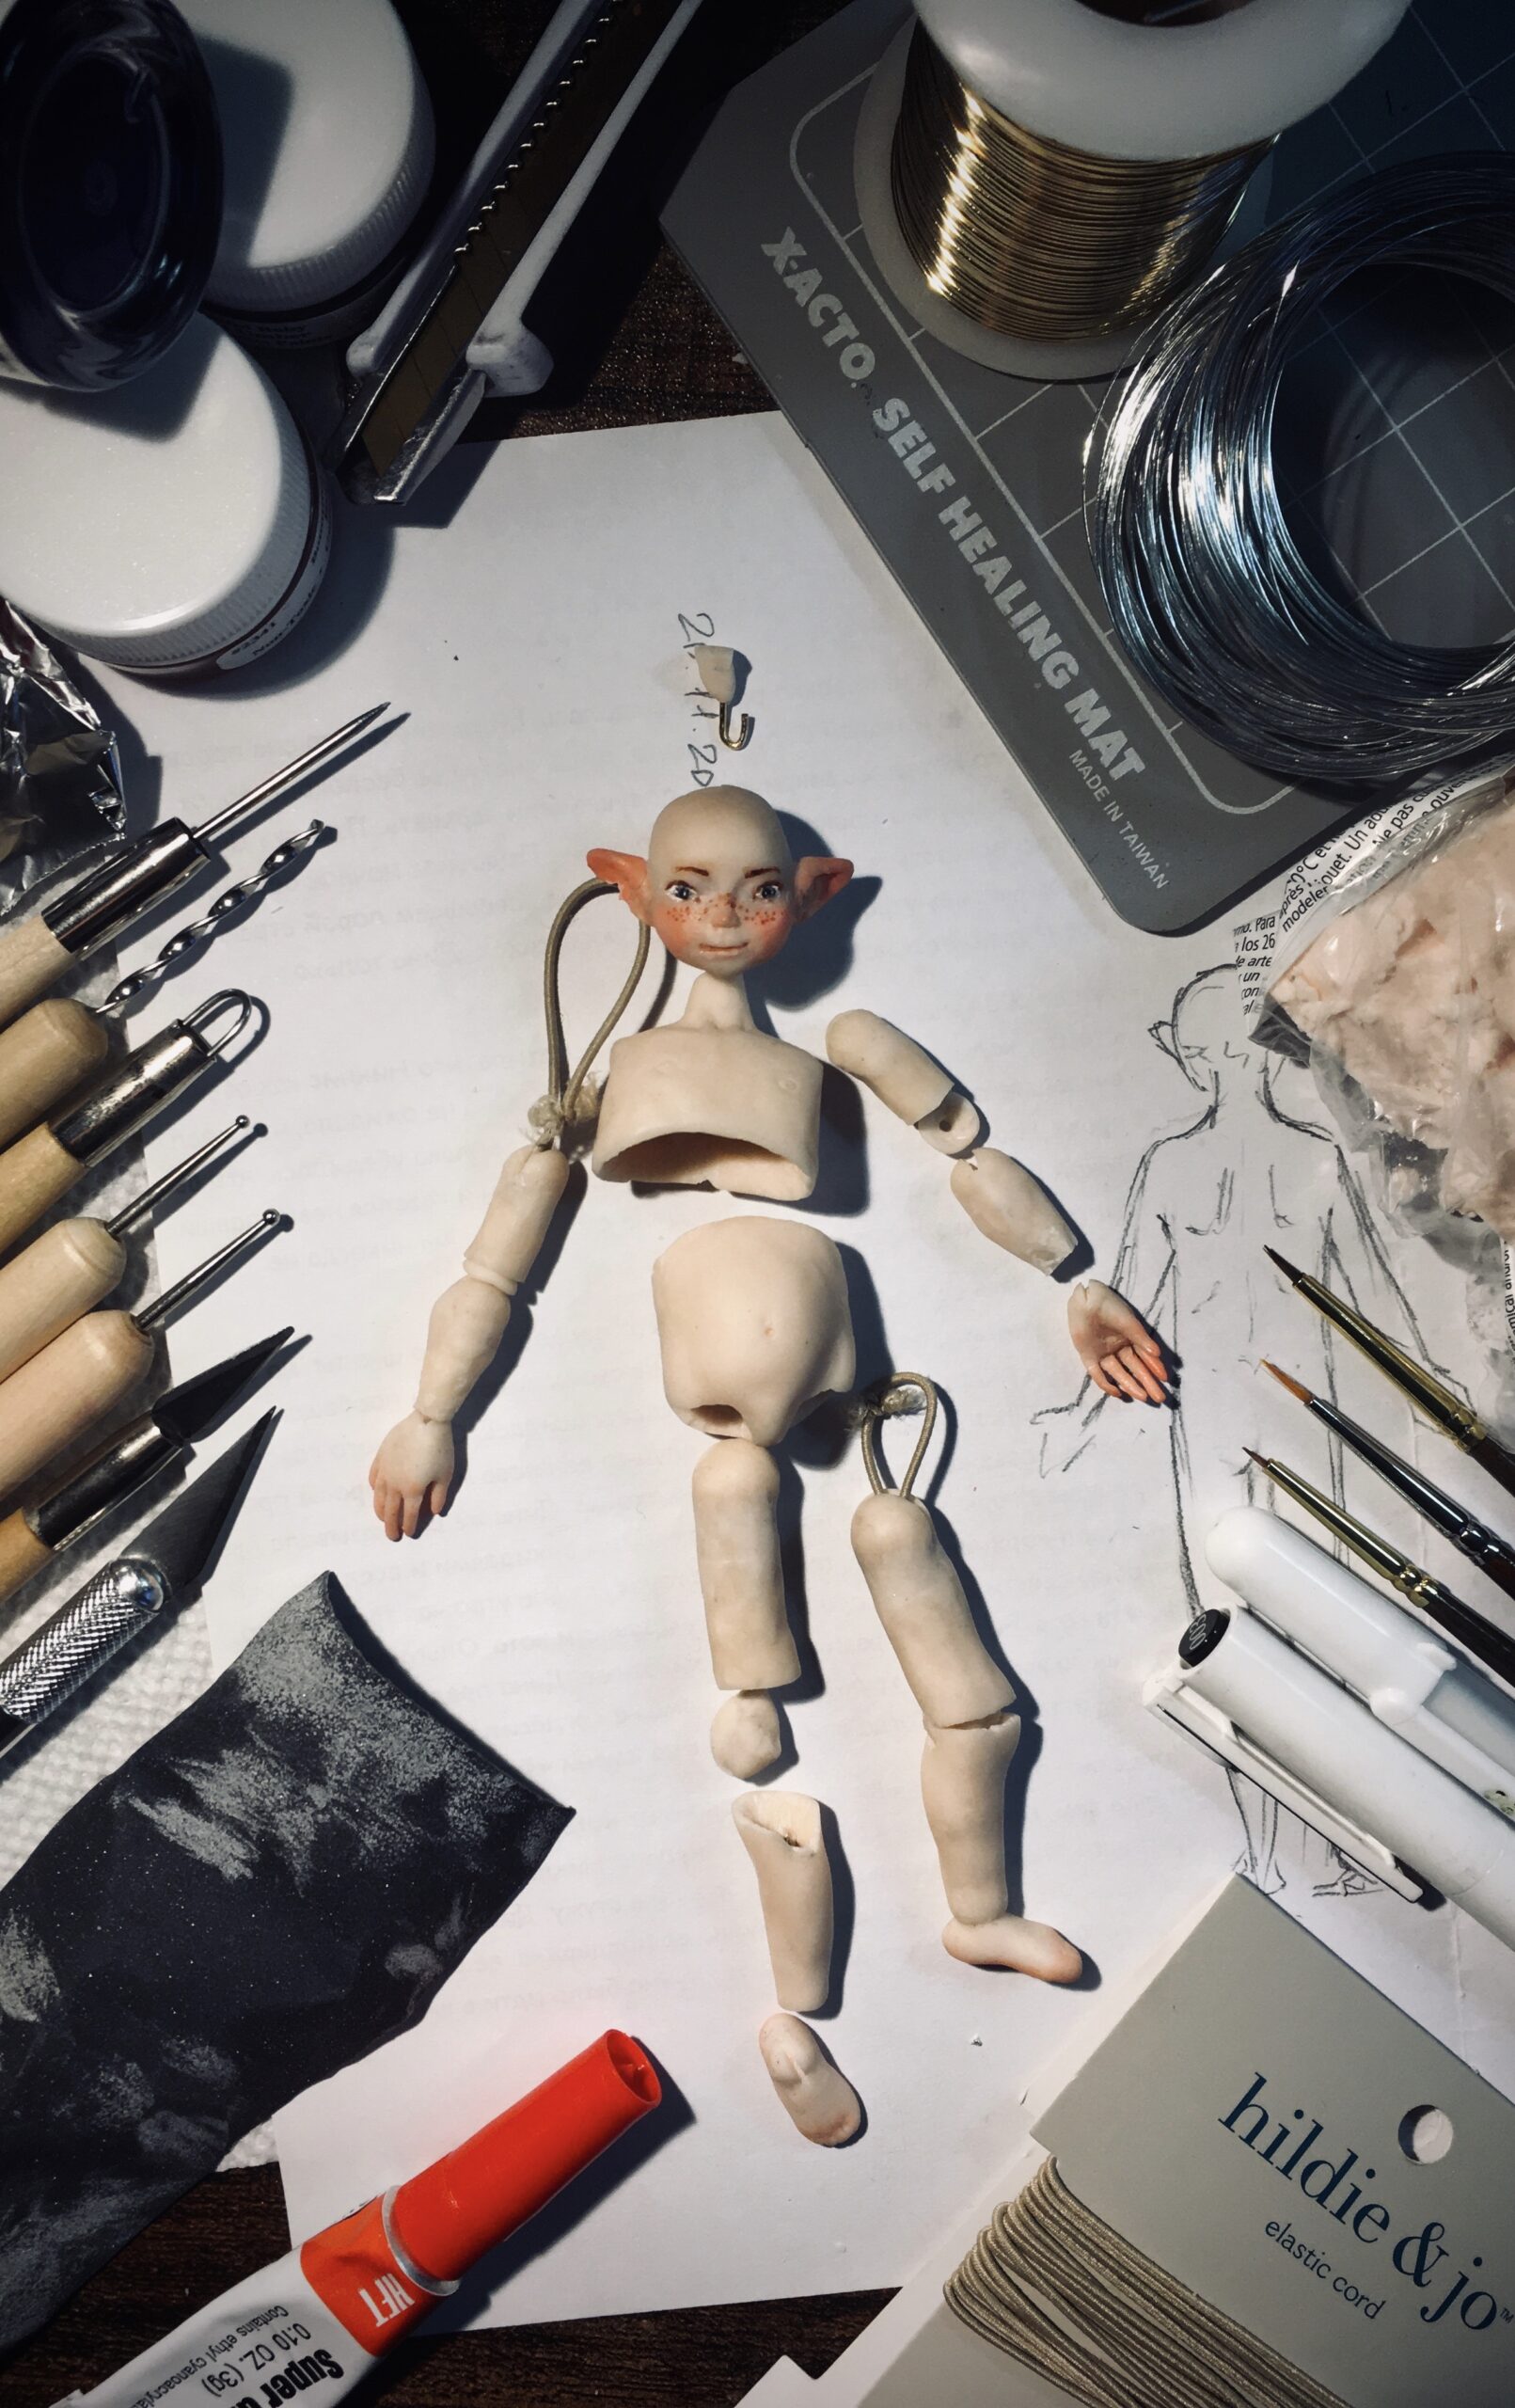 Disassembled doll and tools